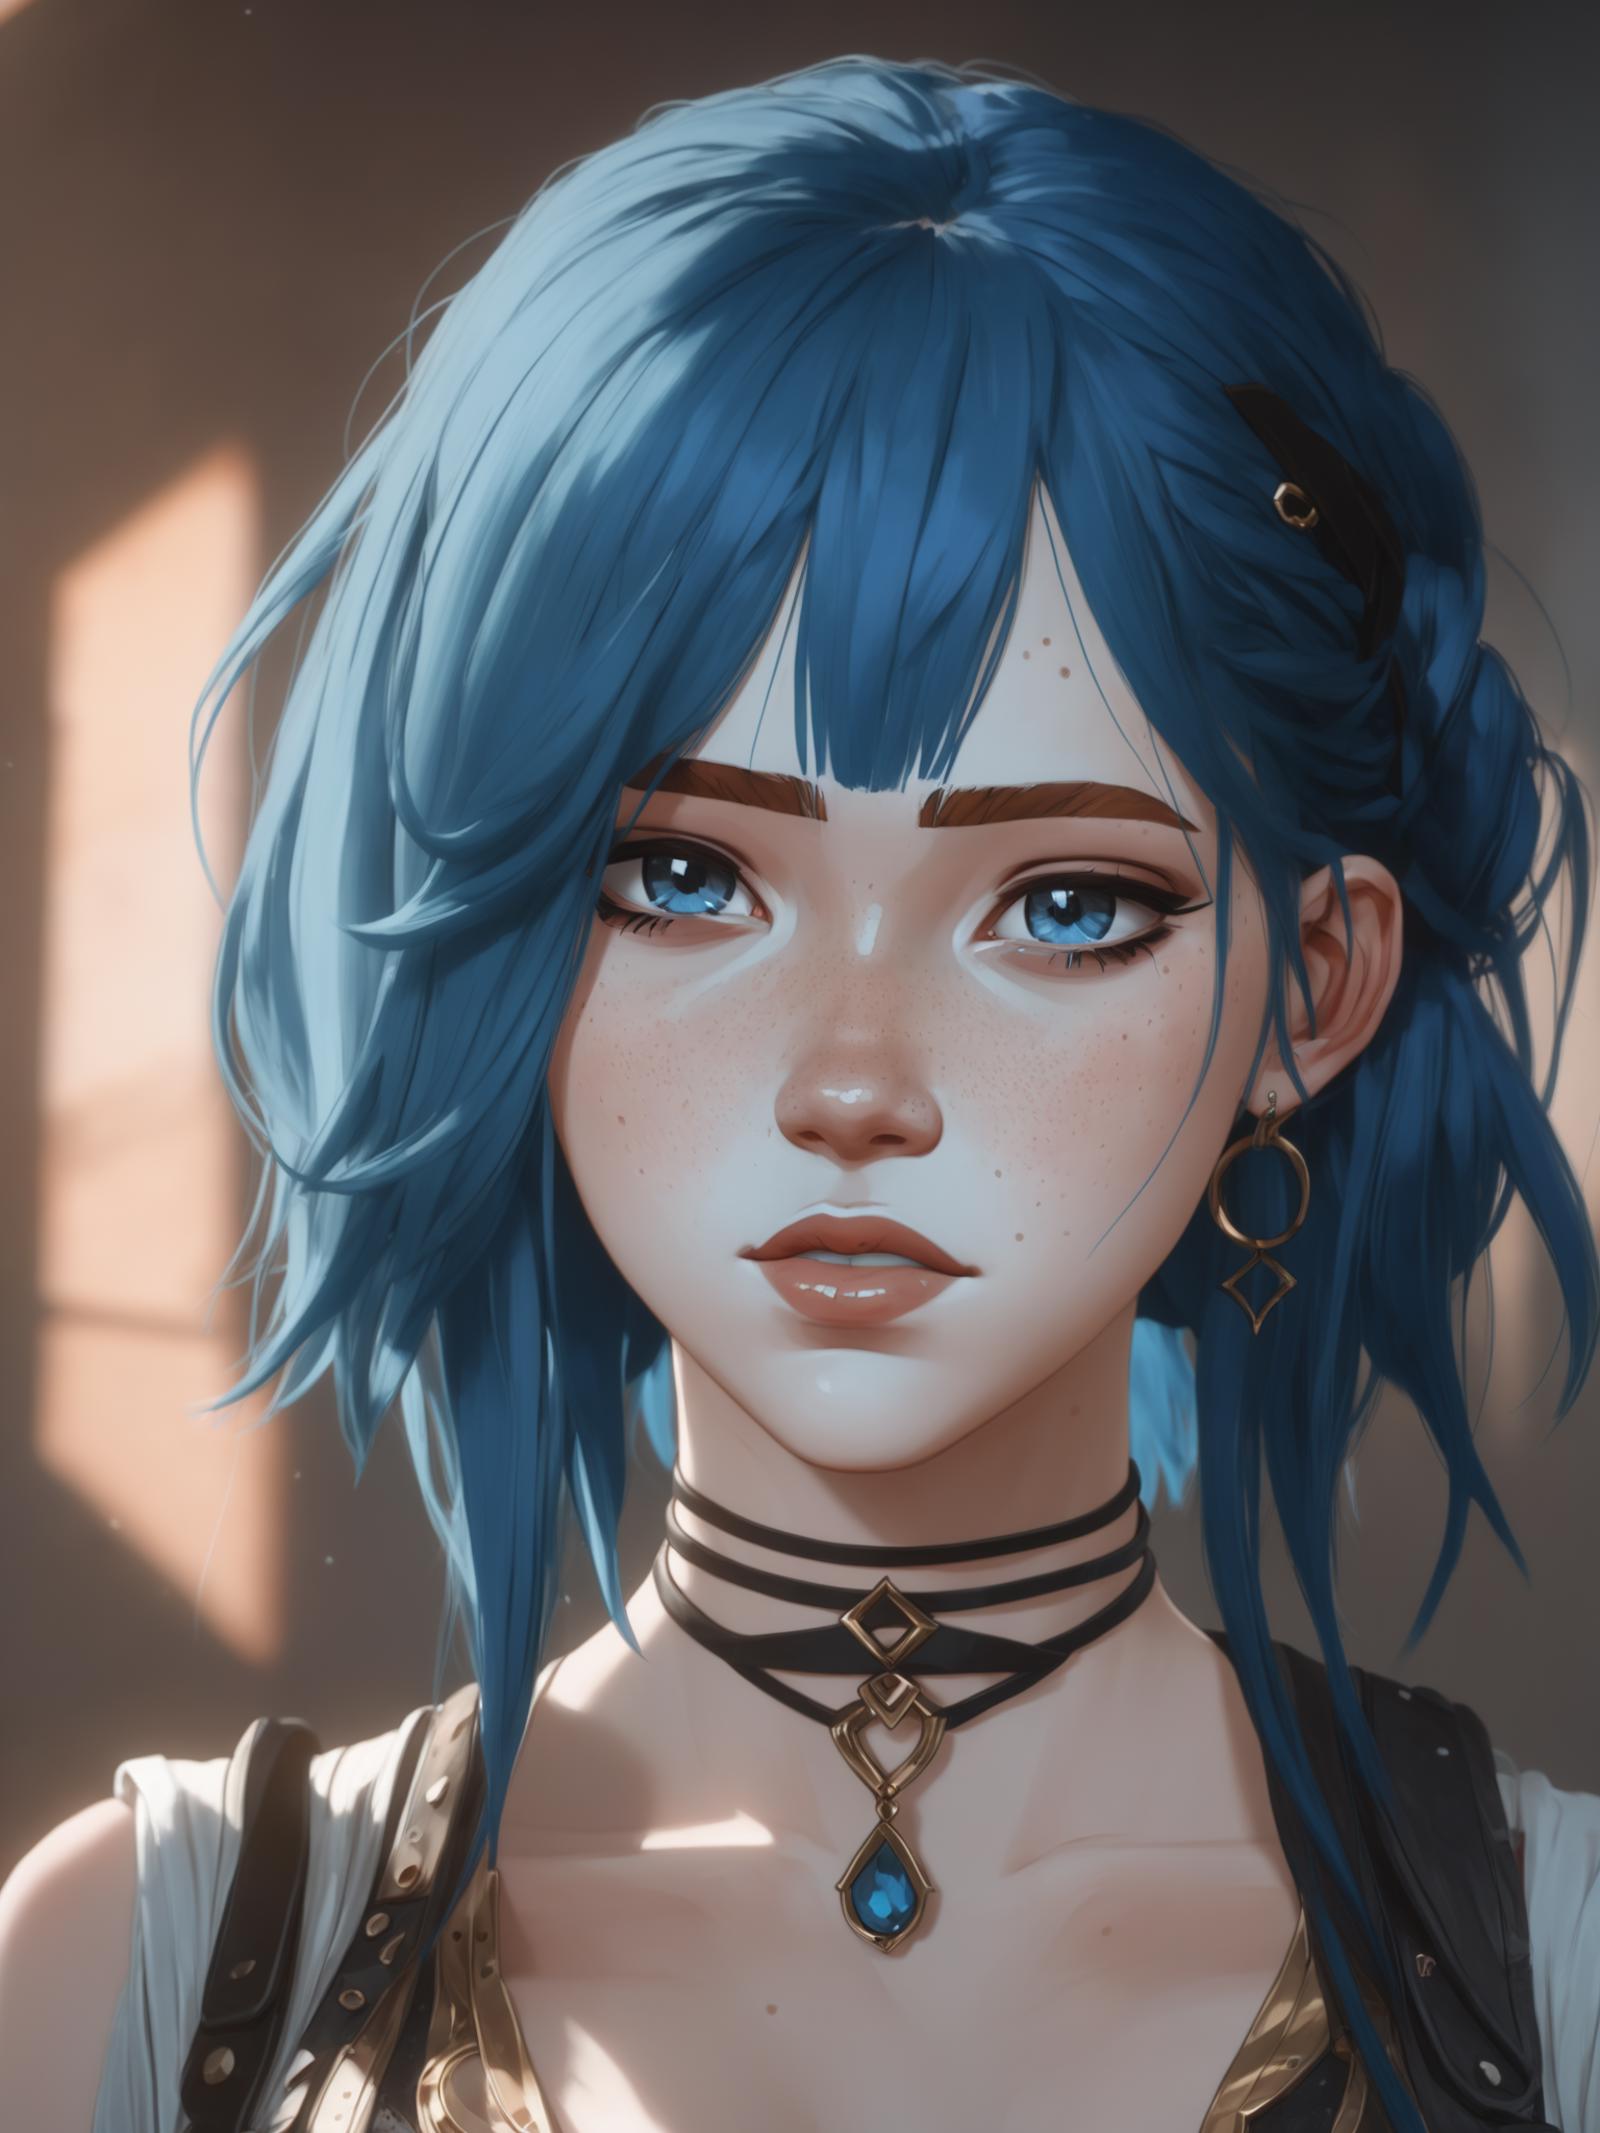 A blue haired woman wearing a black choker and earrings.